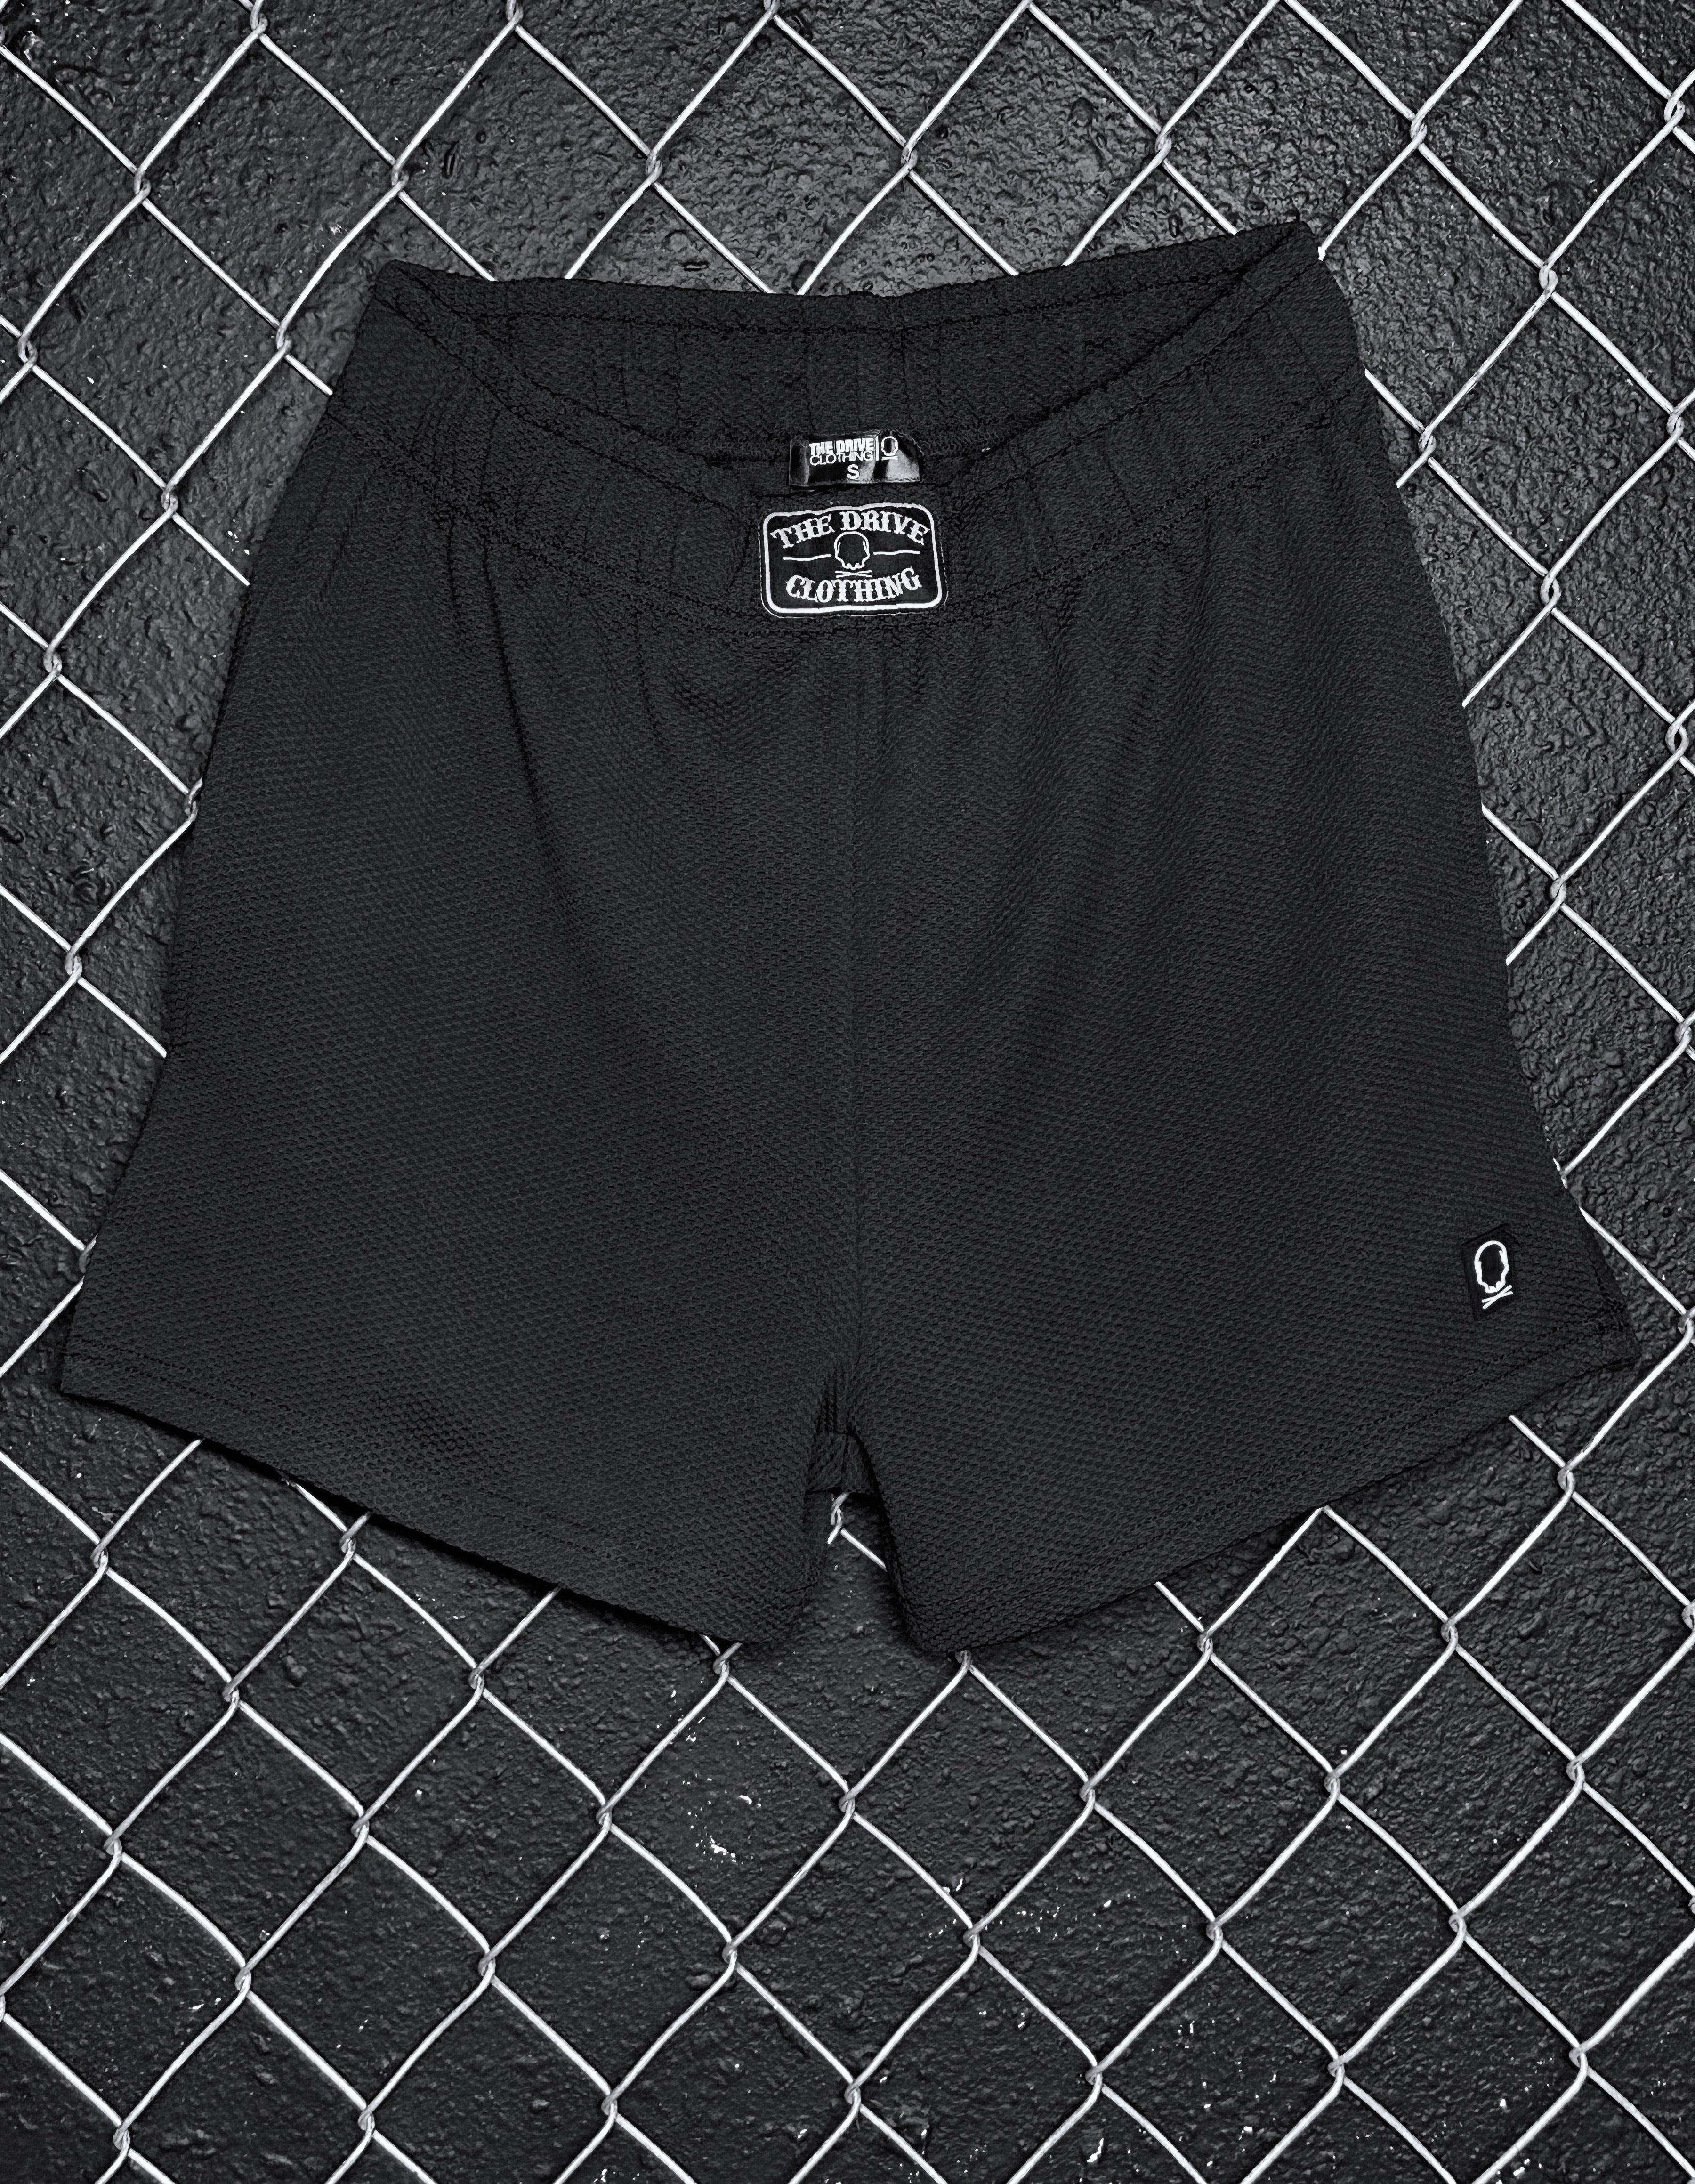 TDC DADDY SHORTS BLACK - The Drive Clothing